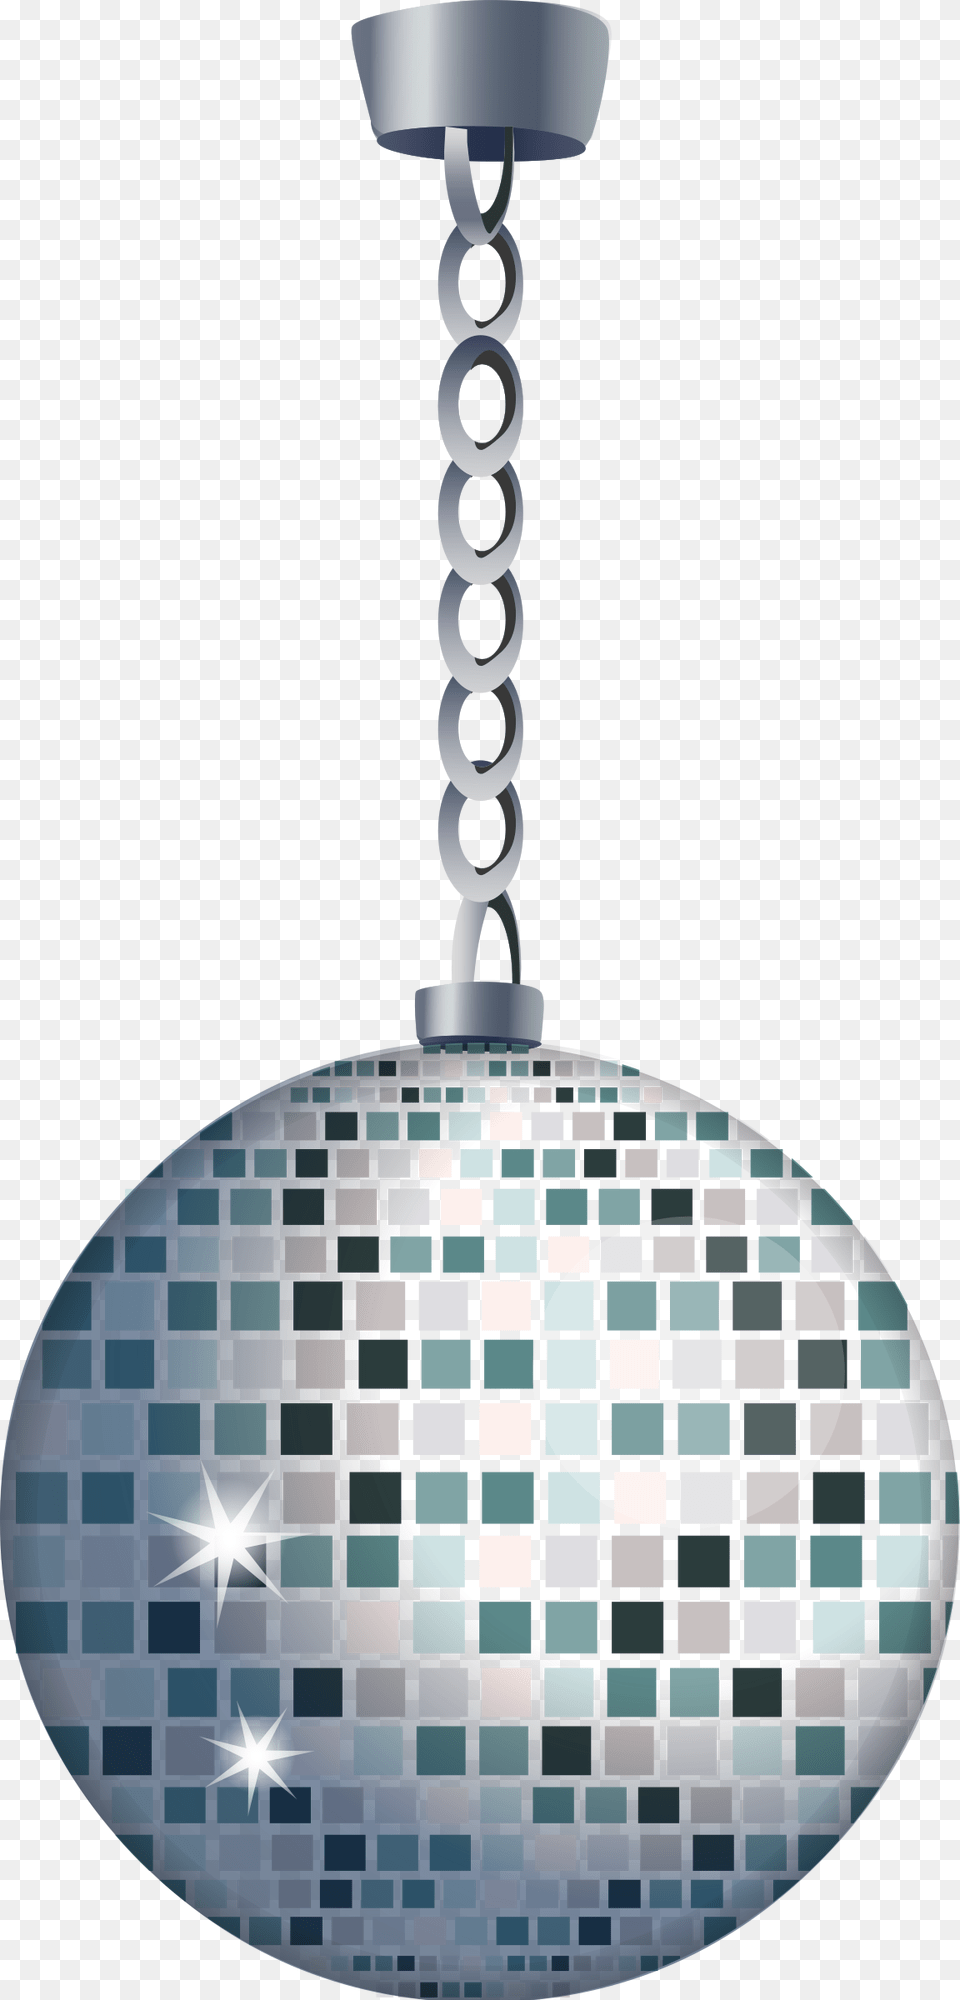 Glitter Ball From Glitch Clip Arts Disco Ball, Lighting, Accessories, Chandelier, Lamp Png Image